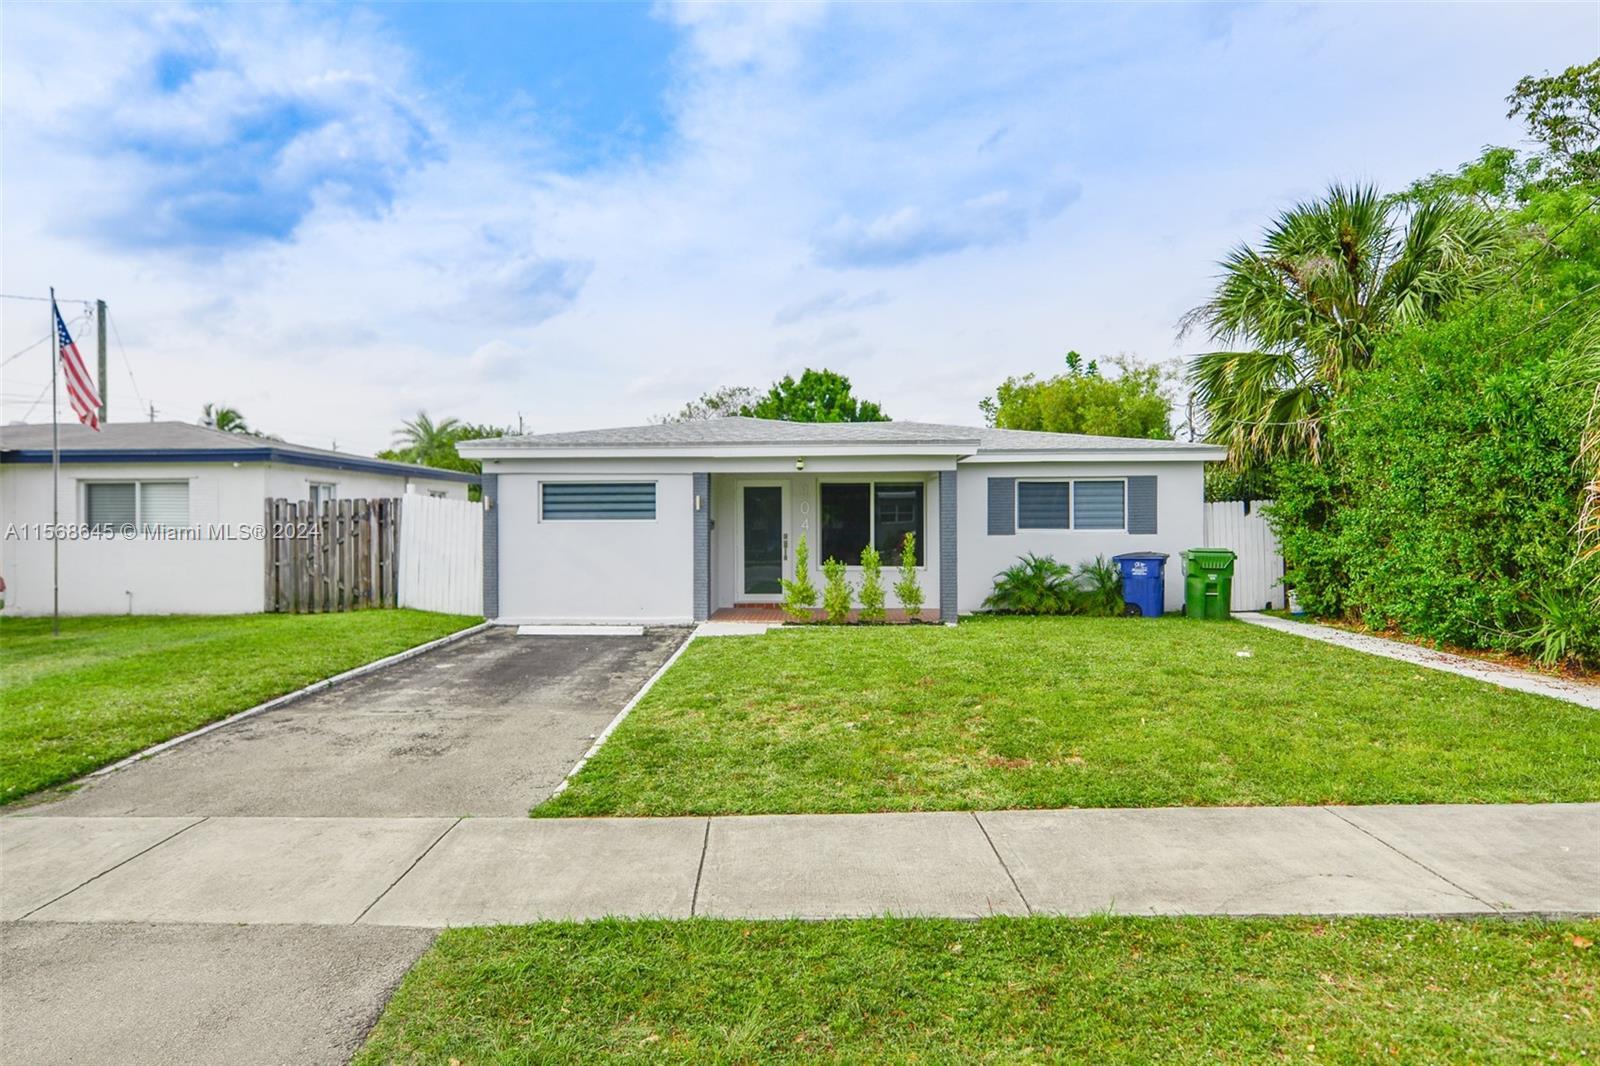 Nestled in the heart of Hallandale, Florida, this charming single-family home boasts three bedrooms 